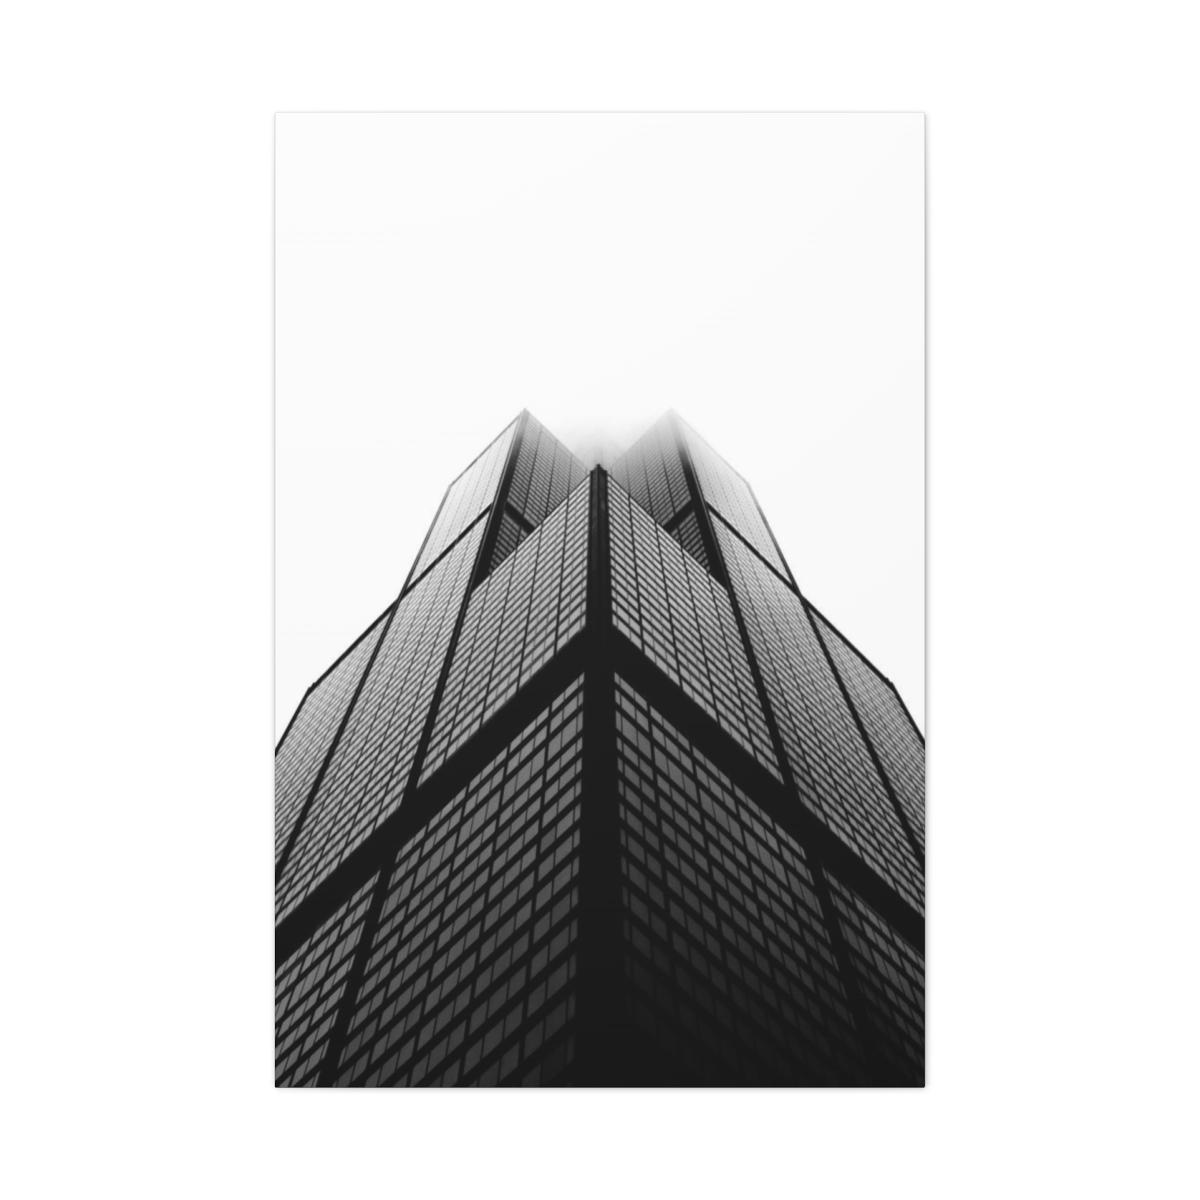 Black and white architecture photography